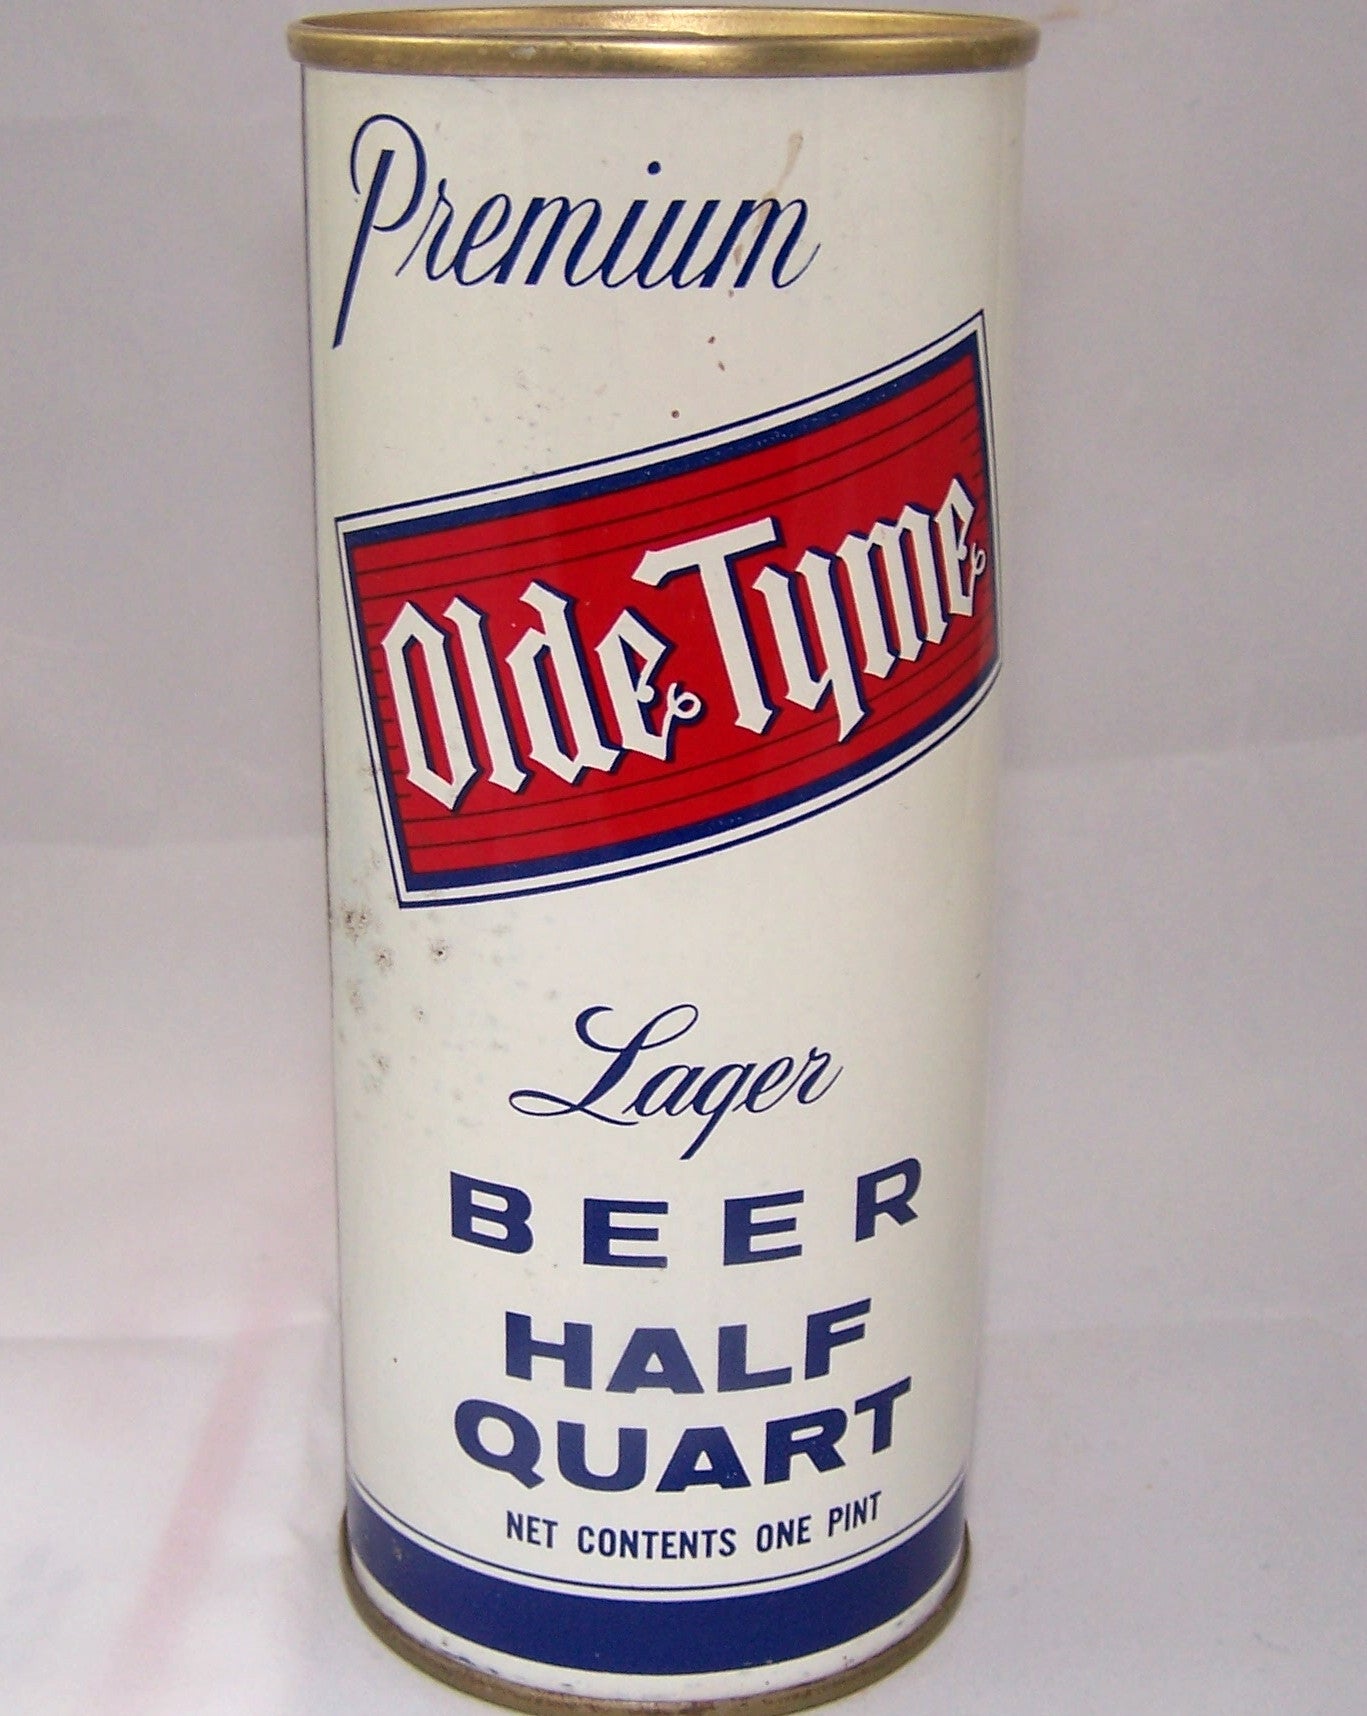 Old Tyme Lager Beer, USBC II 161-11, Grade 1/1- Sold 5/17/15